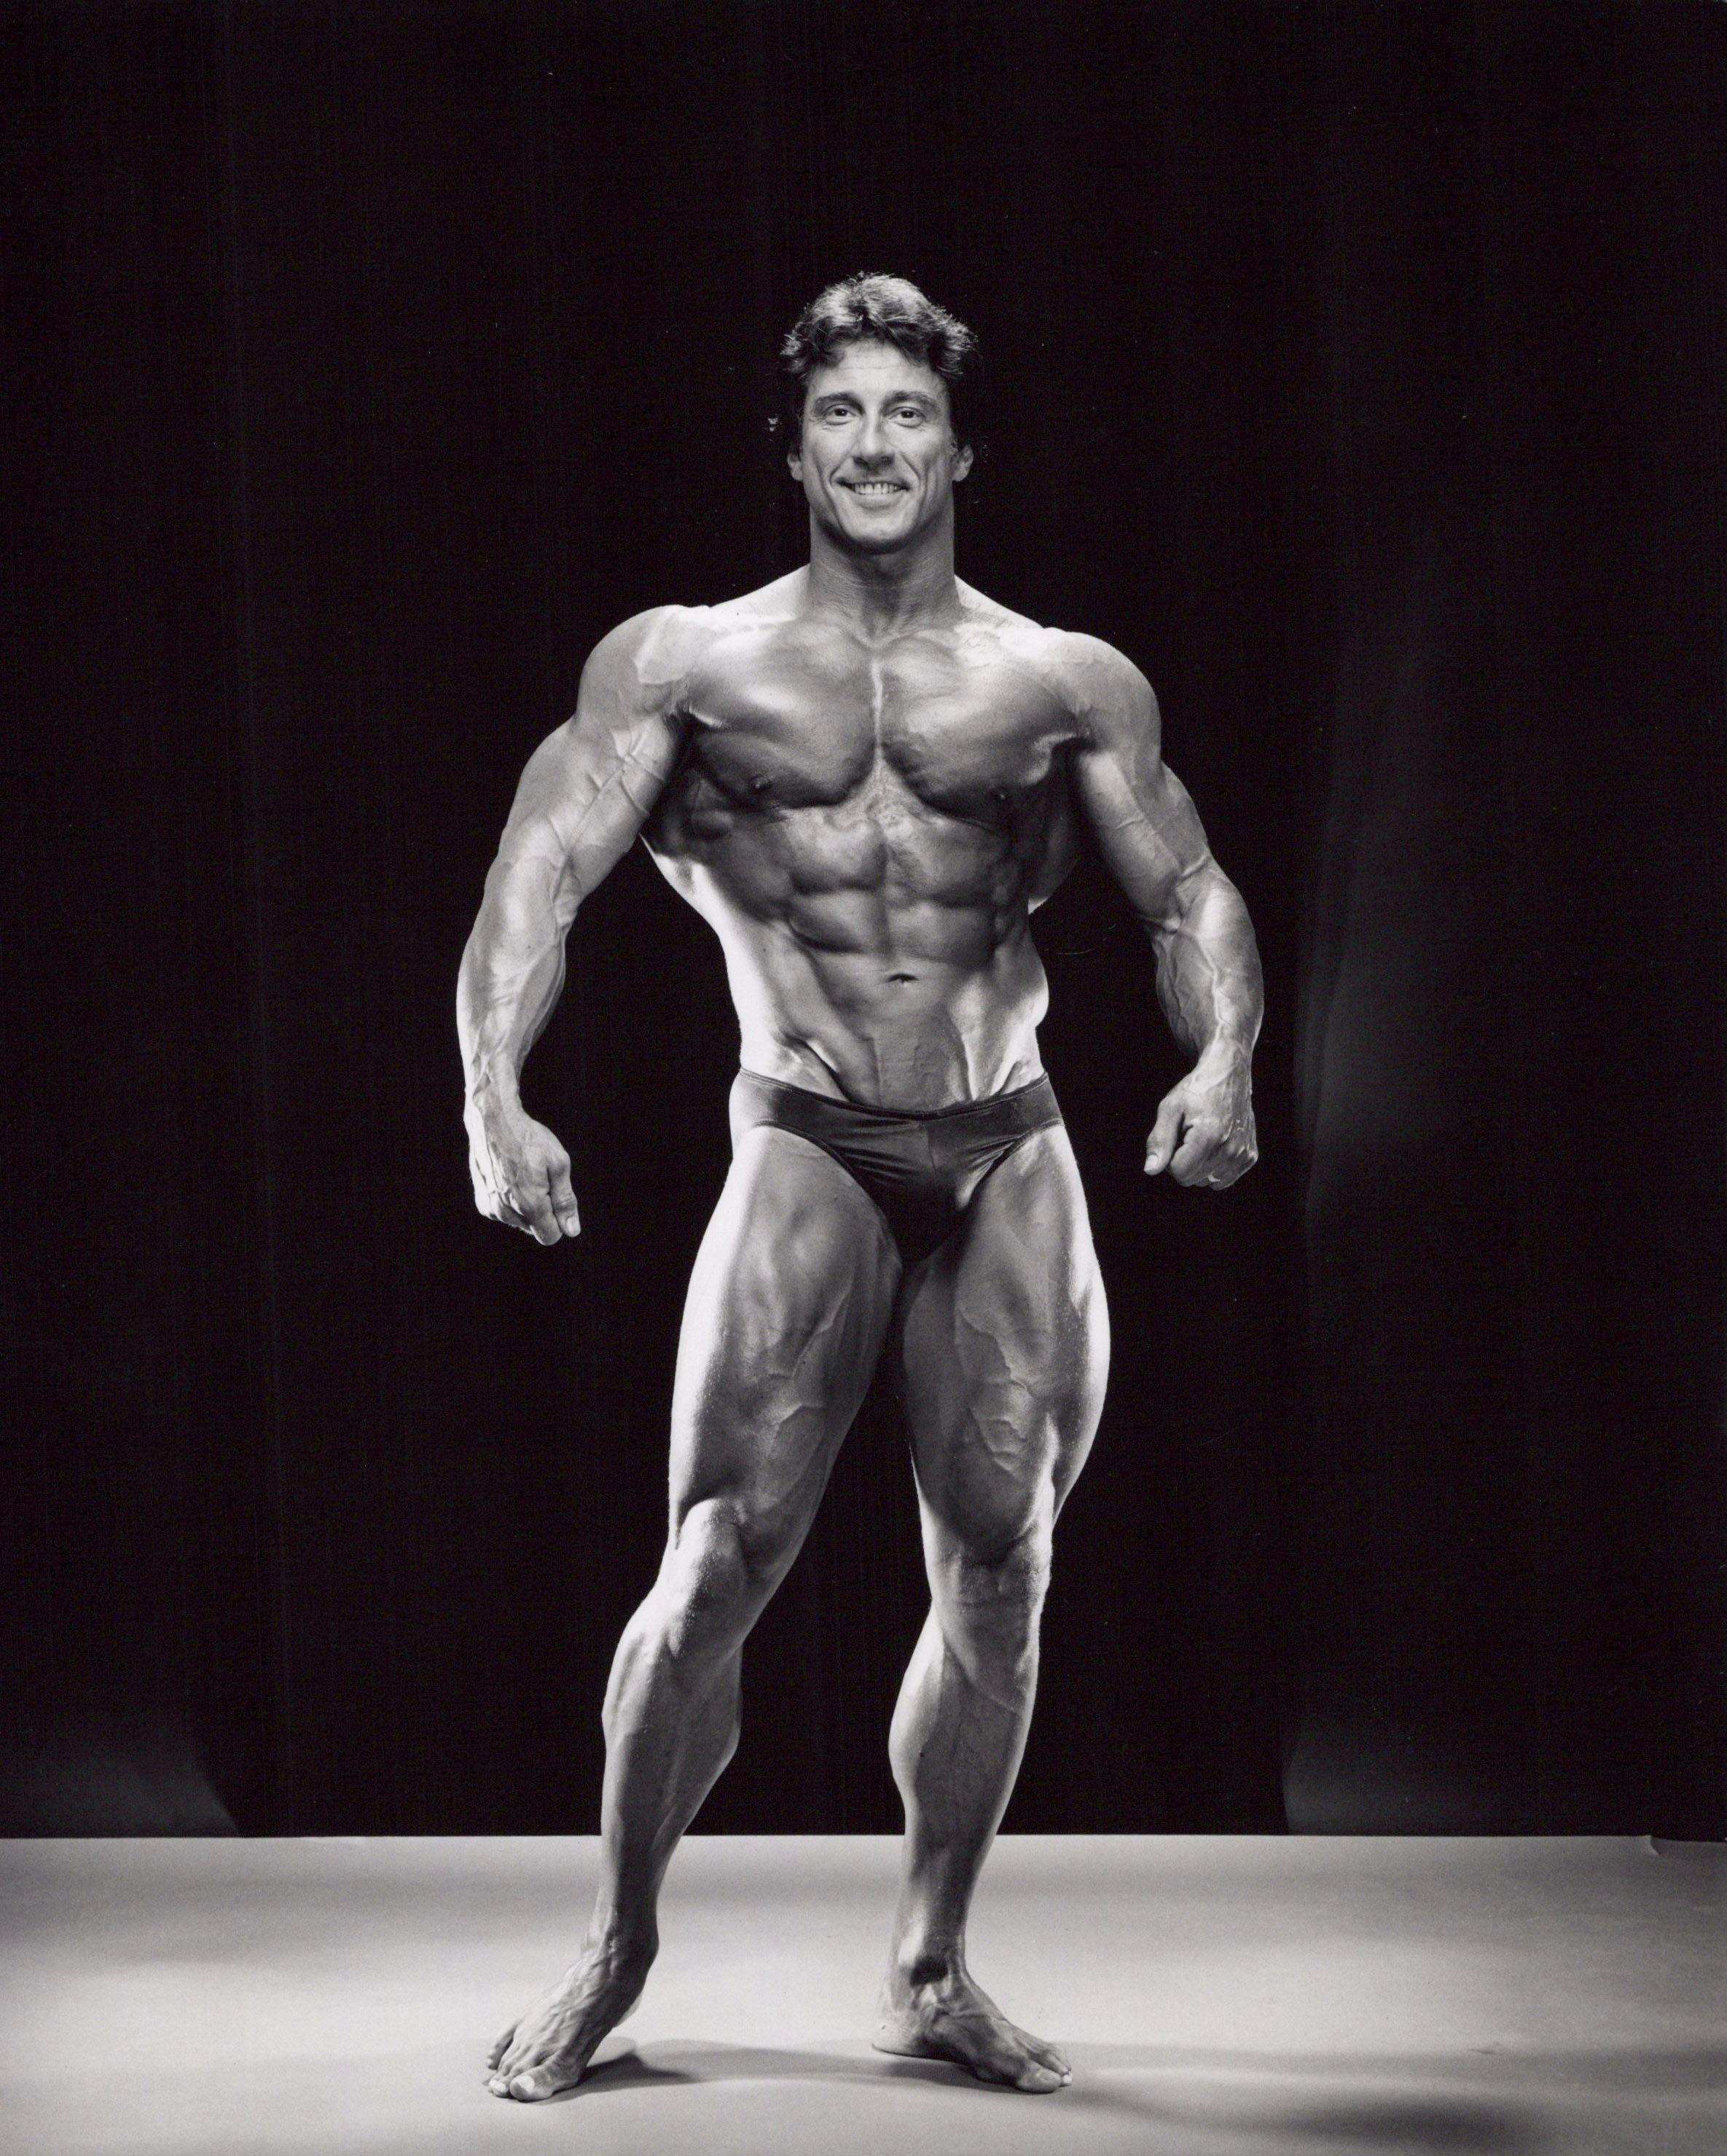 Jack Mitchell Black and White Photograph - Professional Bodybuilder and three time Mr. Olympia winner Frank Zane